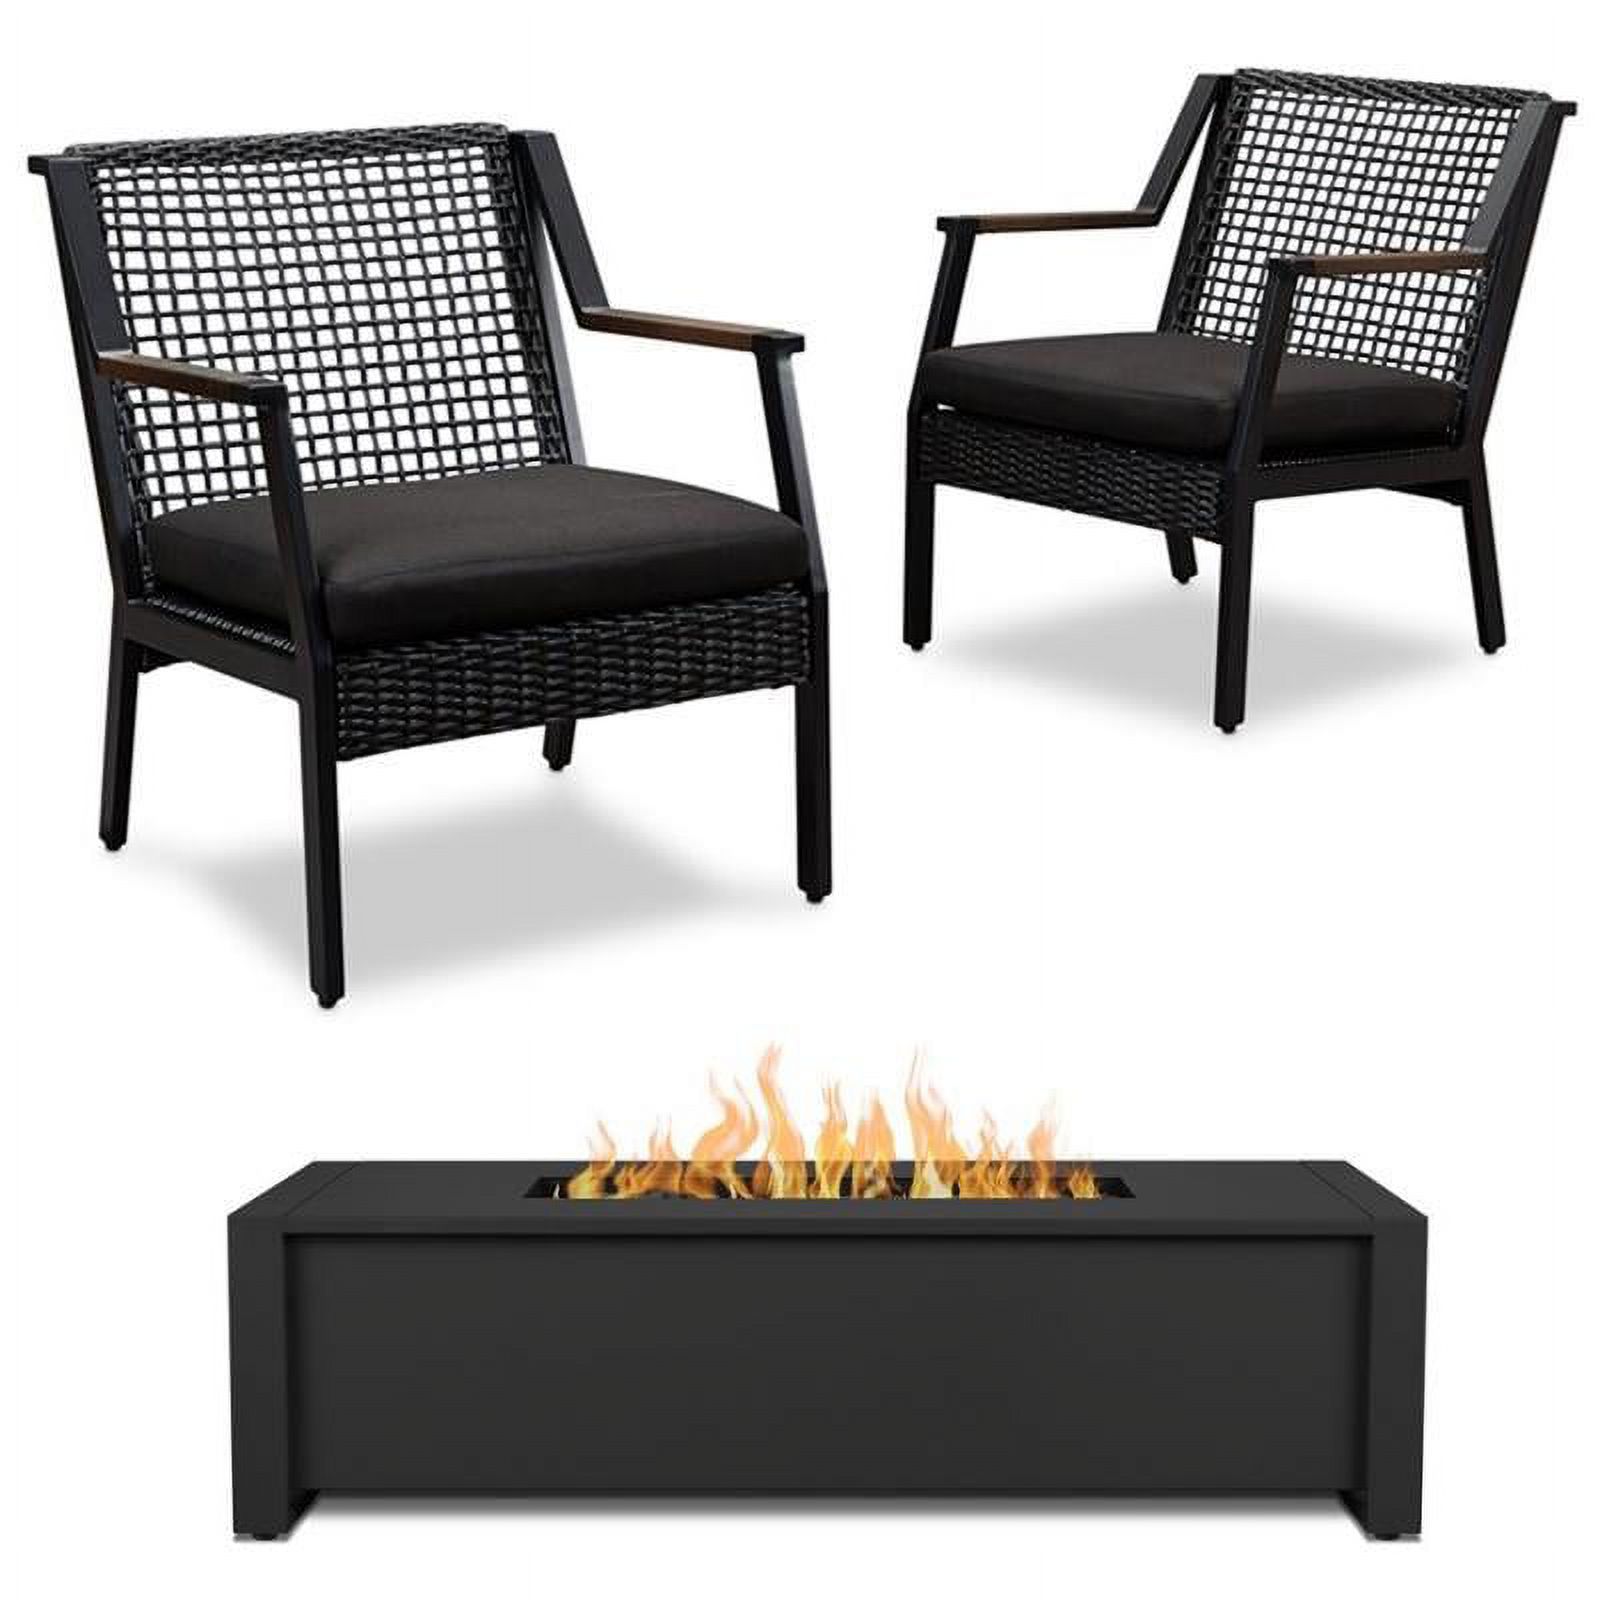 Home Square 3 Piece Garden Patio Set with Fire Table and 2 Chairs in Black - image 1 of 15